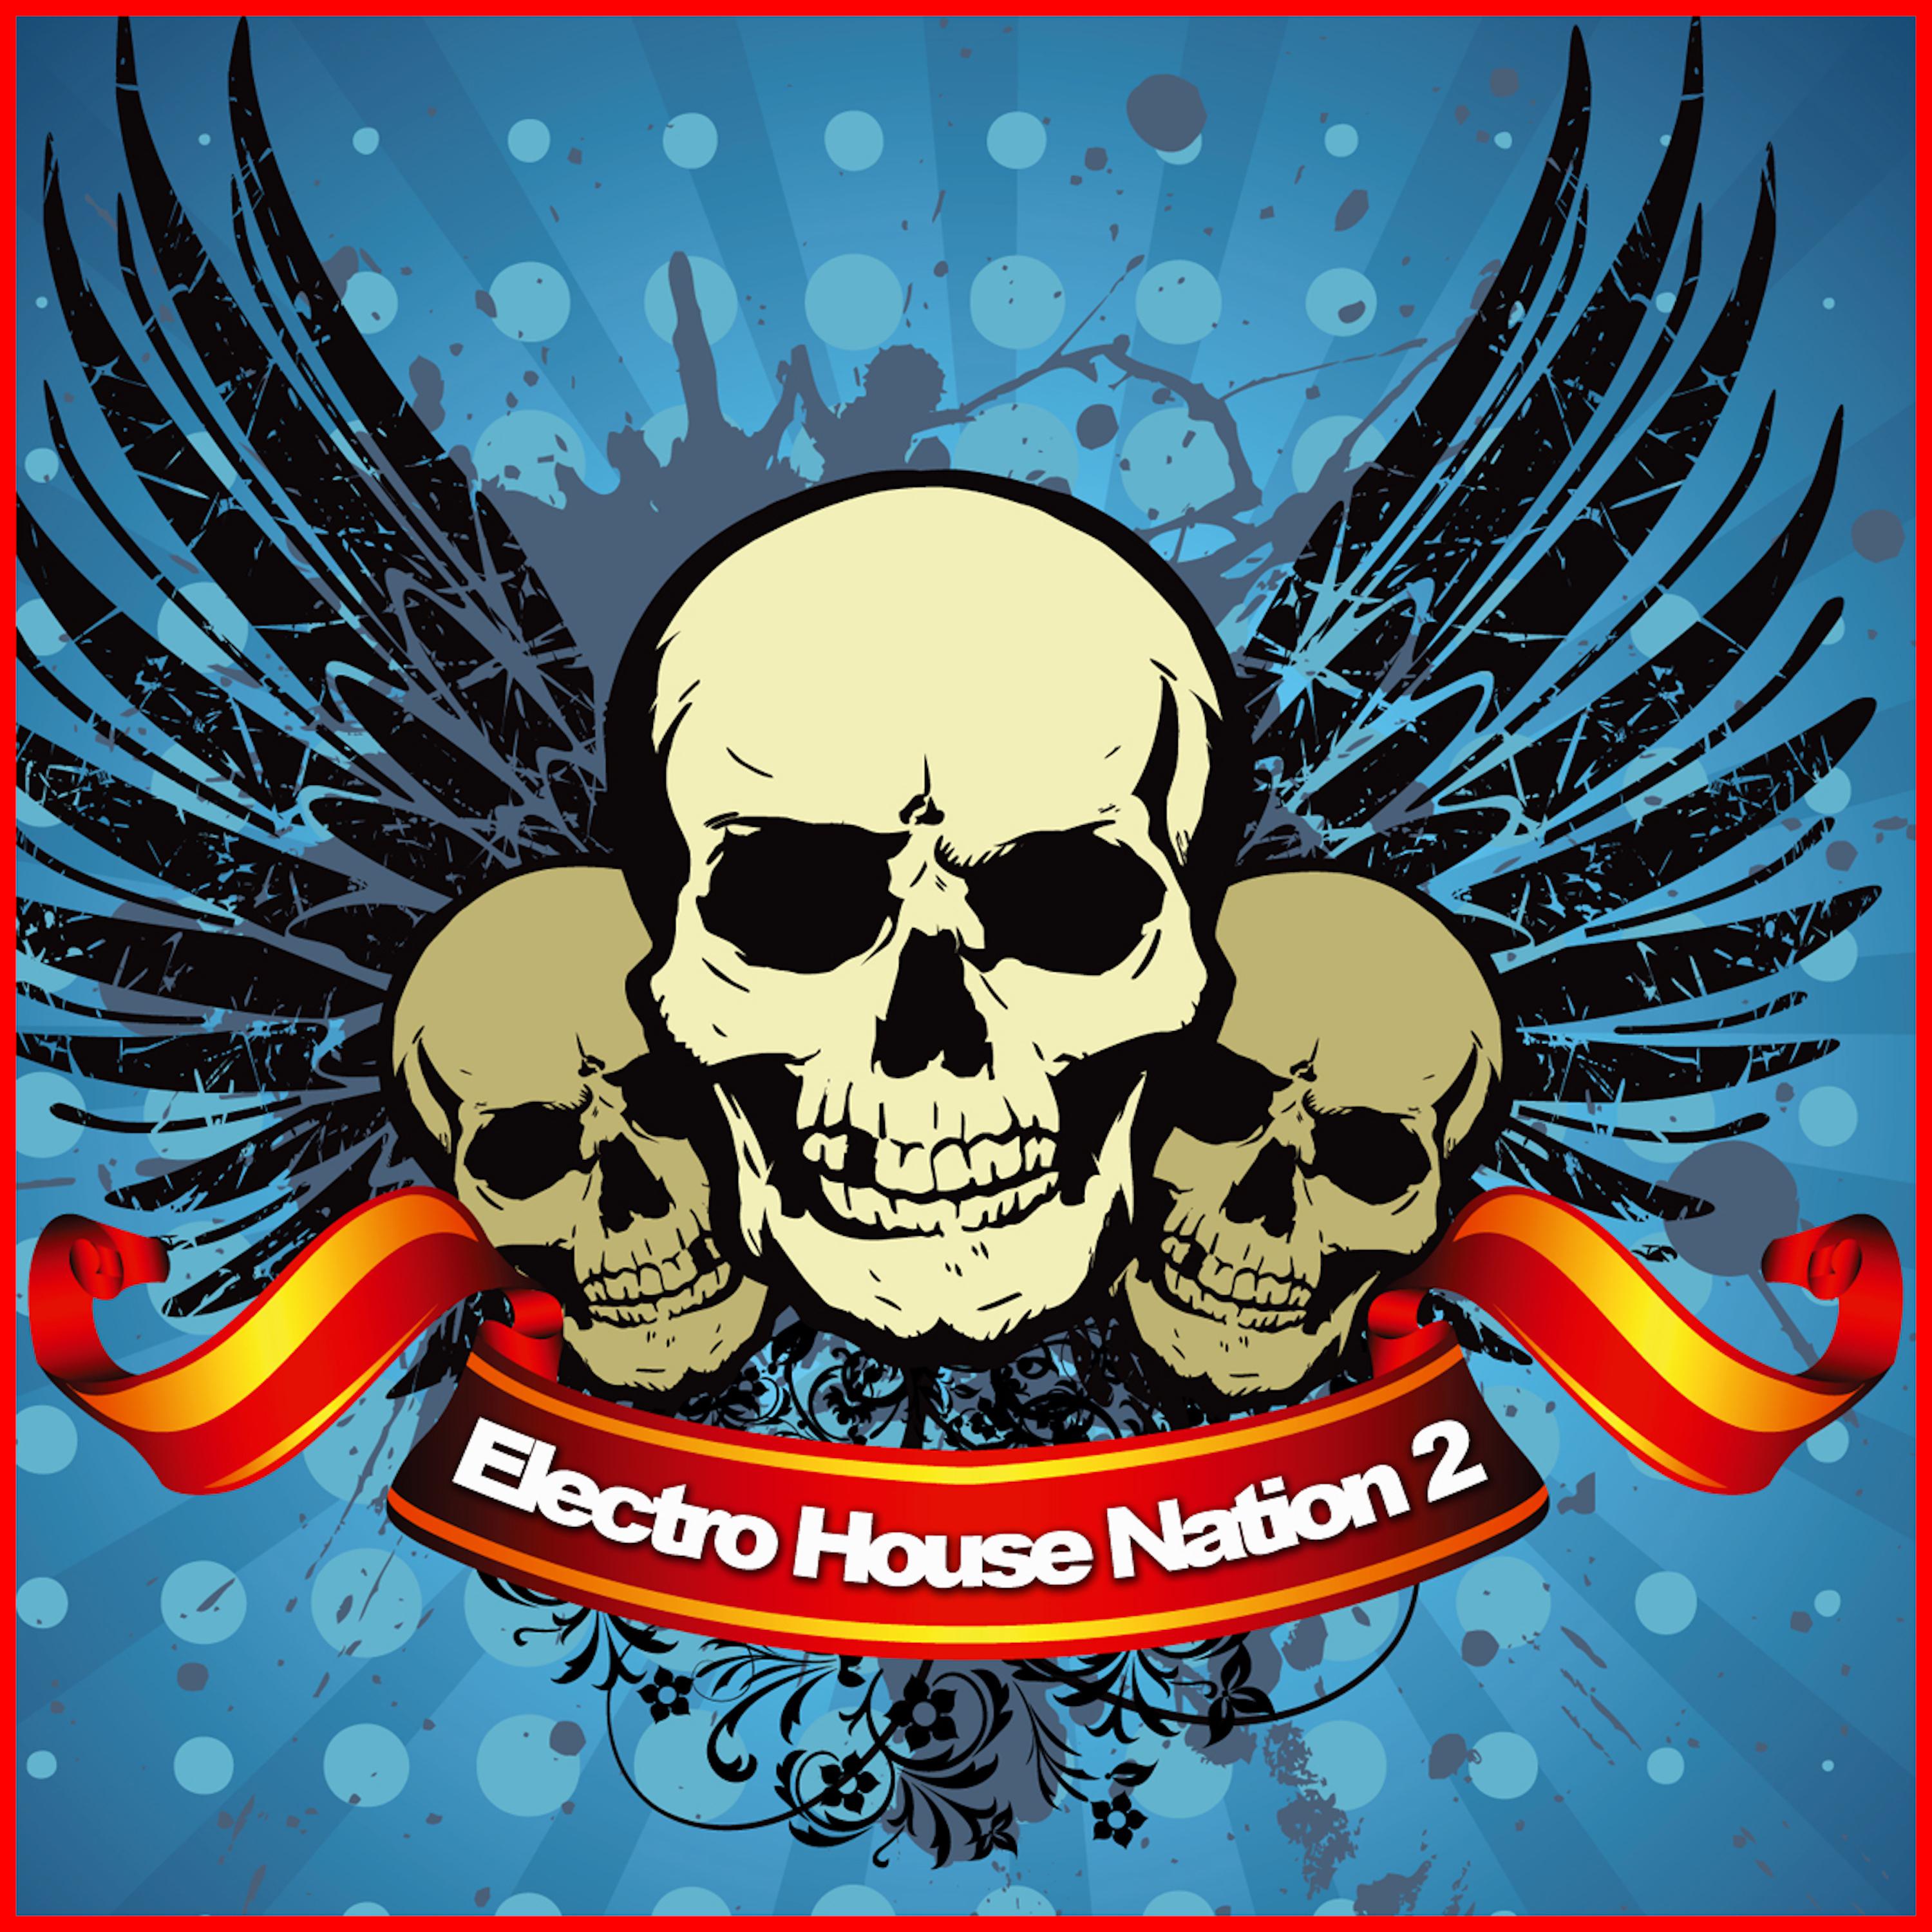 Electro House Nation Vol. 2